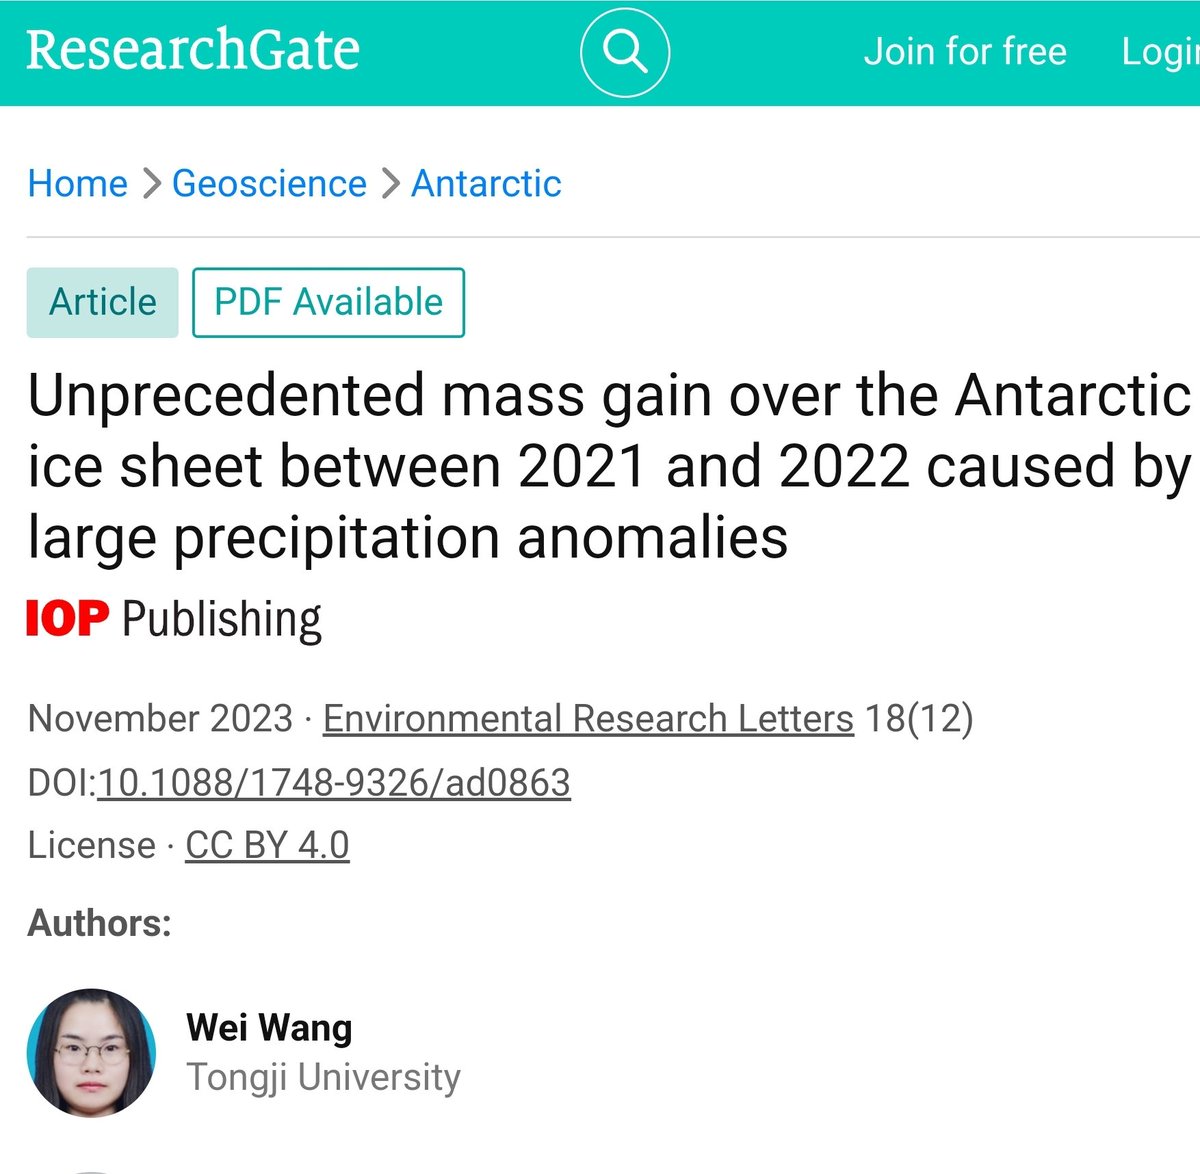 New Study: Unprecedented mass gain over the Antarctic ice sheet between 2021 and 2022 - 'The Antarctic Ice Sheet (AIS) showed a record-breaking mass gain of 129.7 ± 69.6 Gt/yr between 2021 and 2022. During this period, the mass gain over the East AIS and Antarctic Peninsula was…